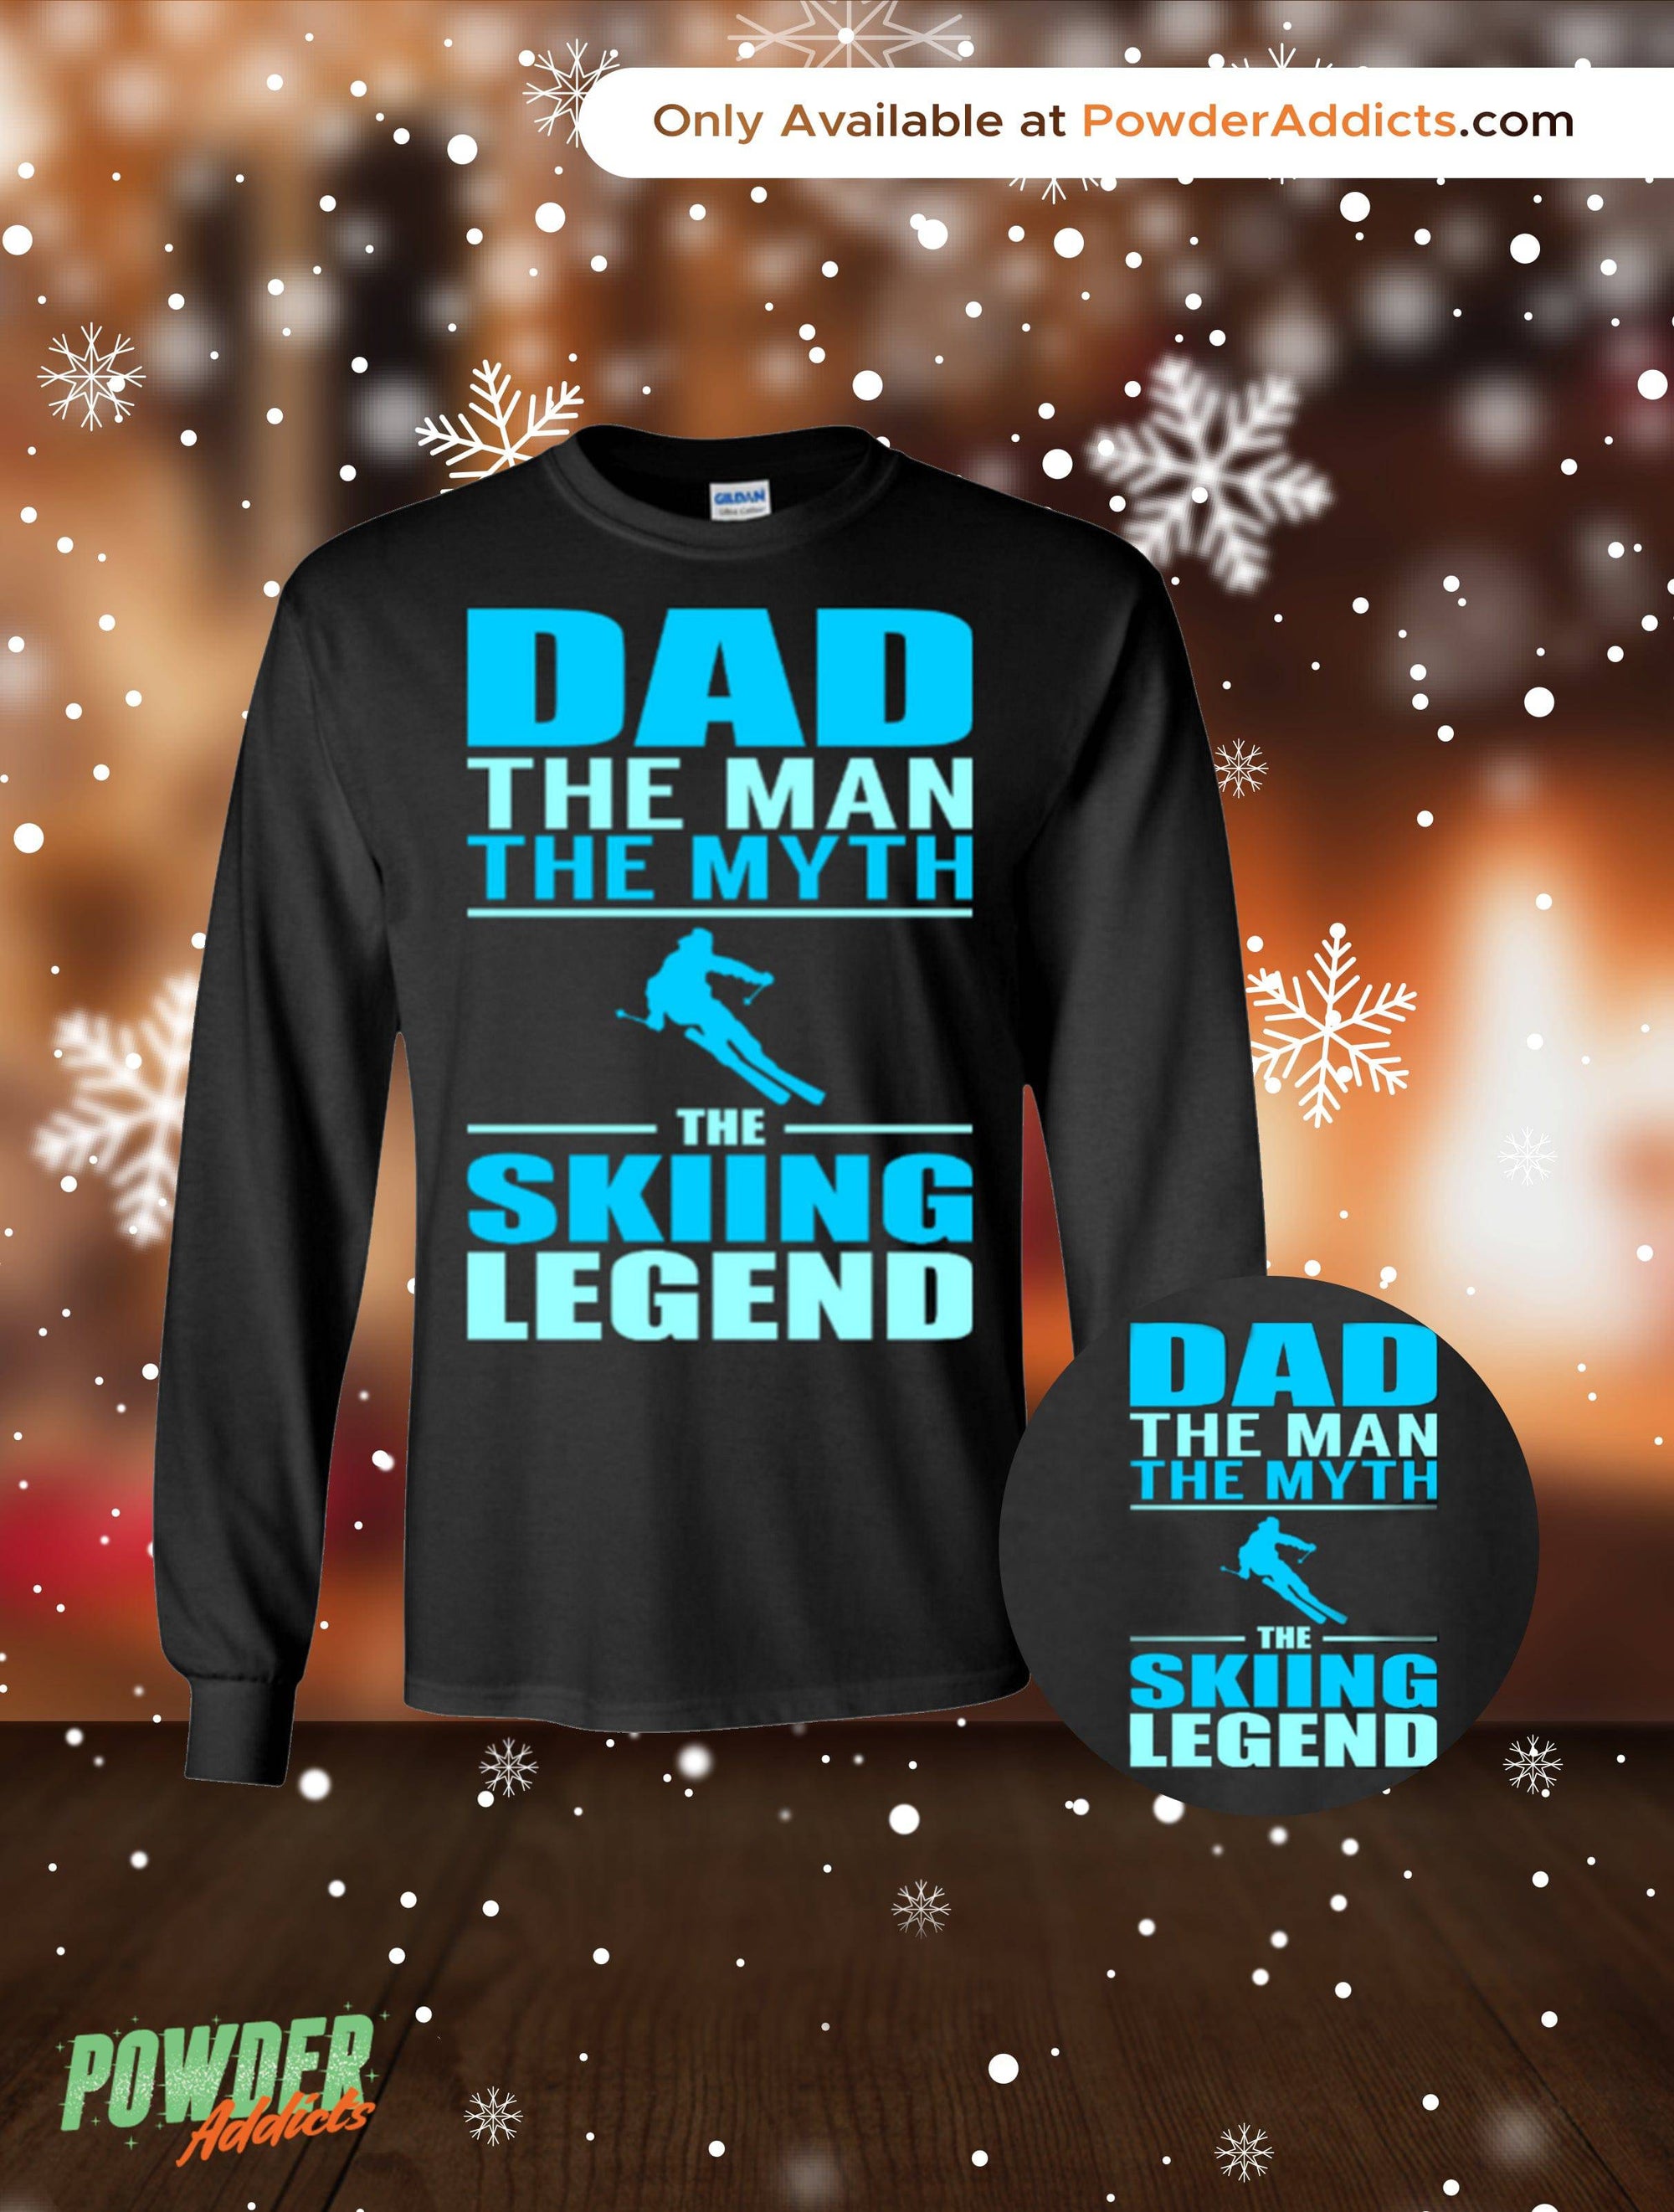 Dad, The Man, The Myth, The Skiing Legend Long Sleeves and Hoodies - Powderaddicts